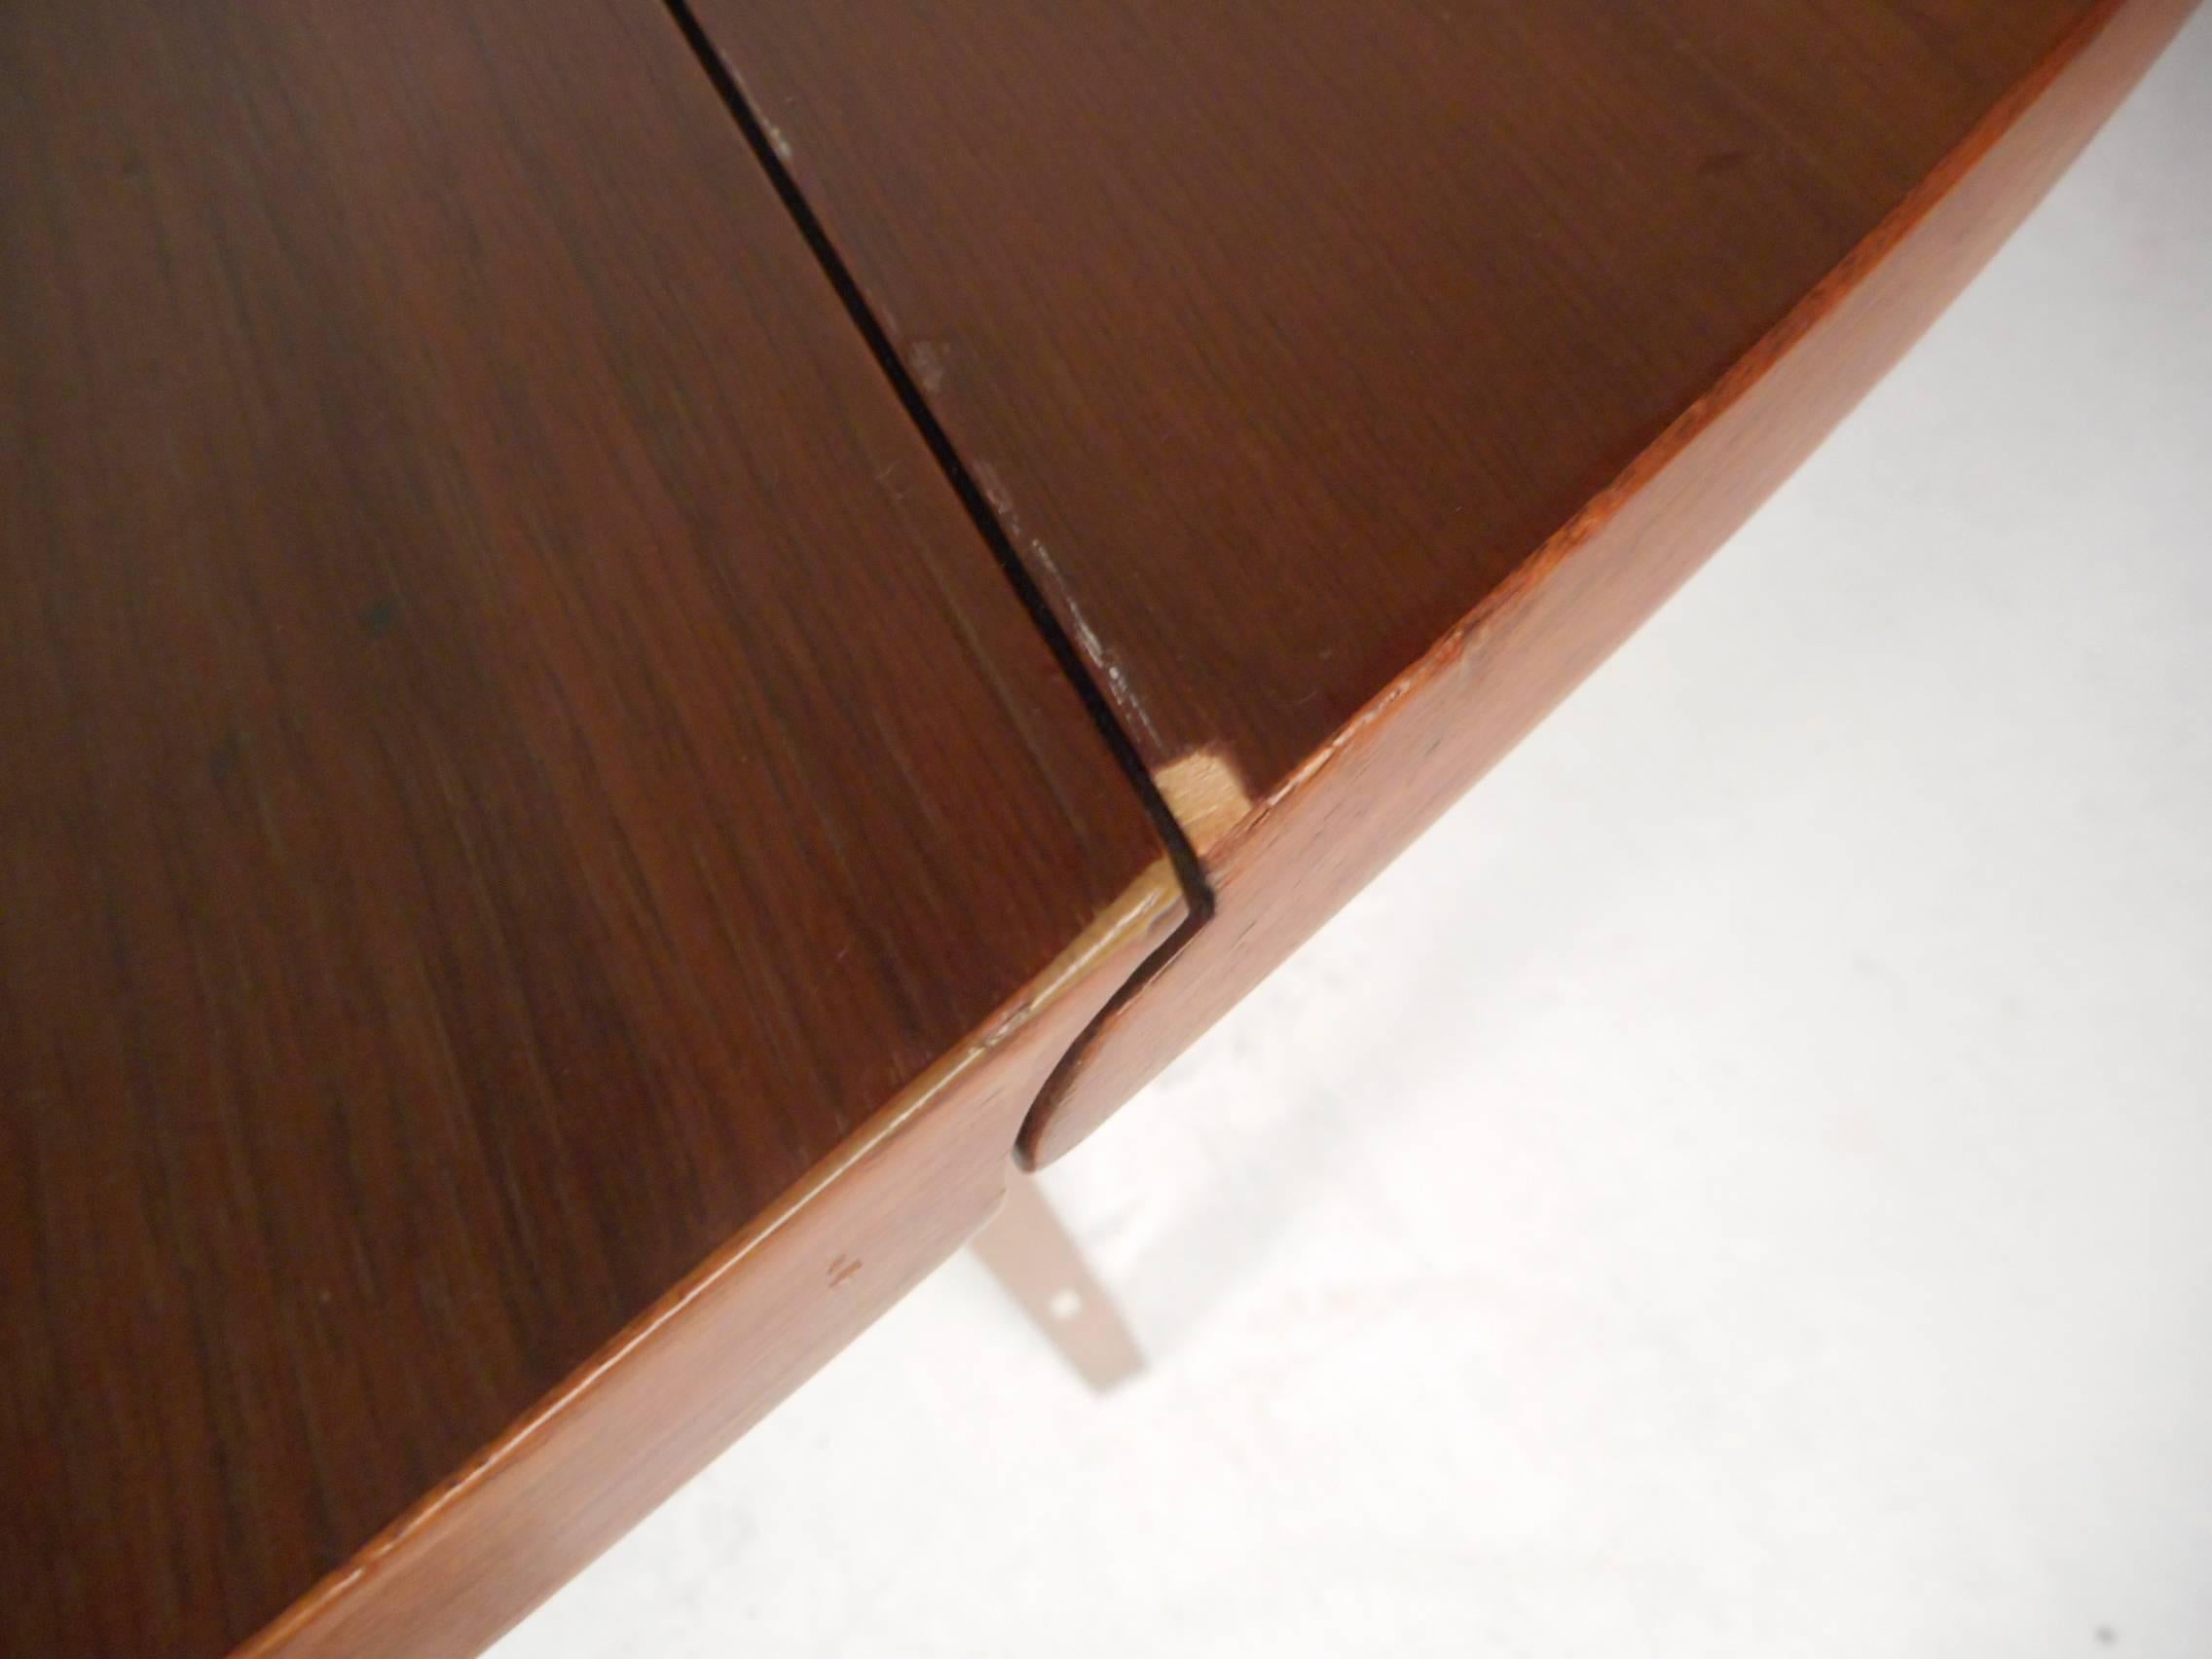 Late 20th Century Mid-Century Modern Expandable Drop-Leaf Dining Table by Paul McCobb For Sale